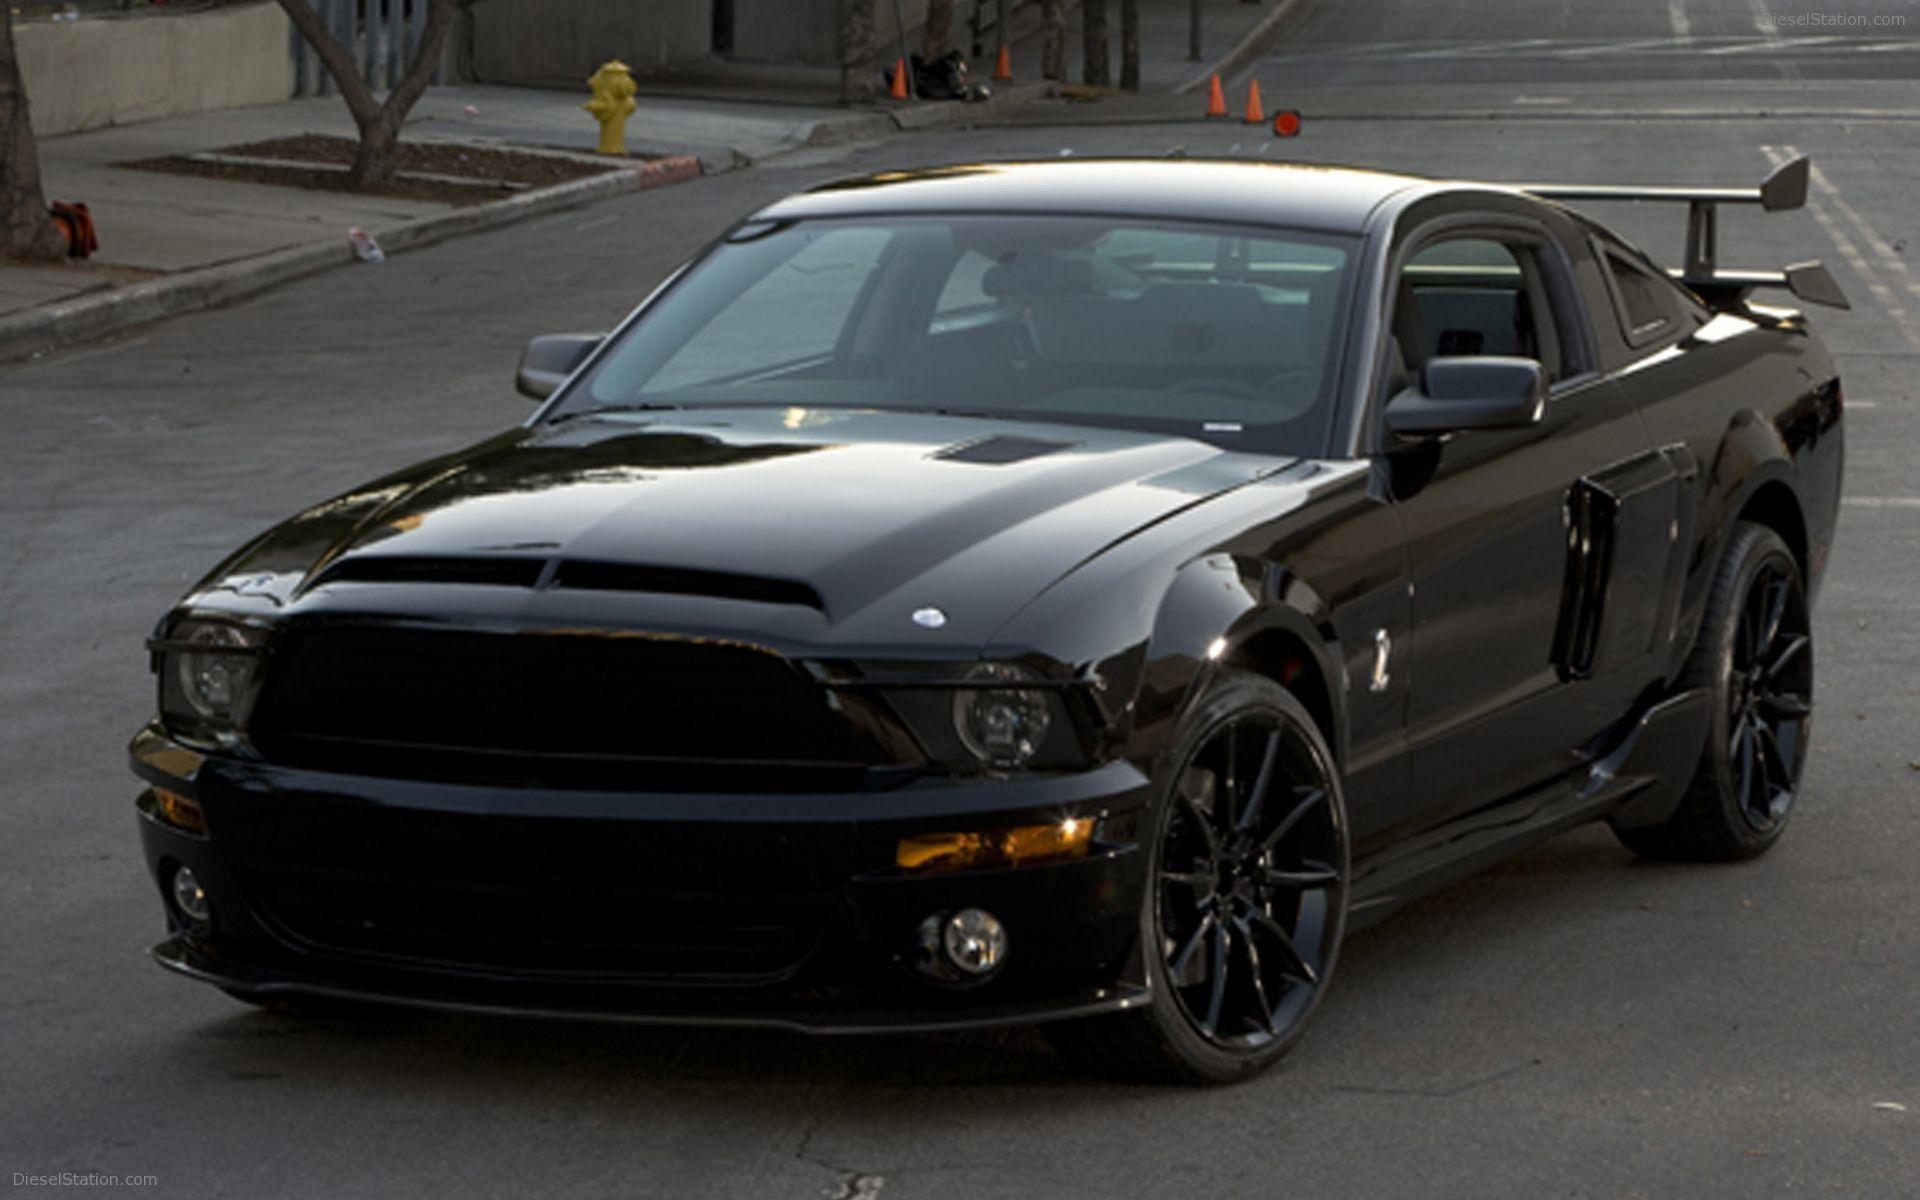 Knight Rider Shelby Mustang GT500KR Widescreen Exotic Car